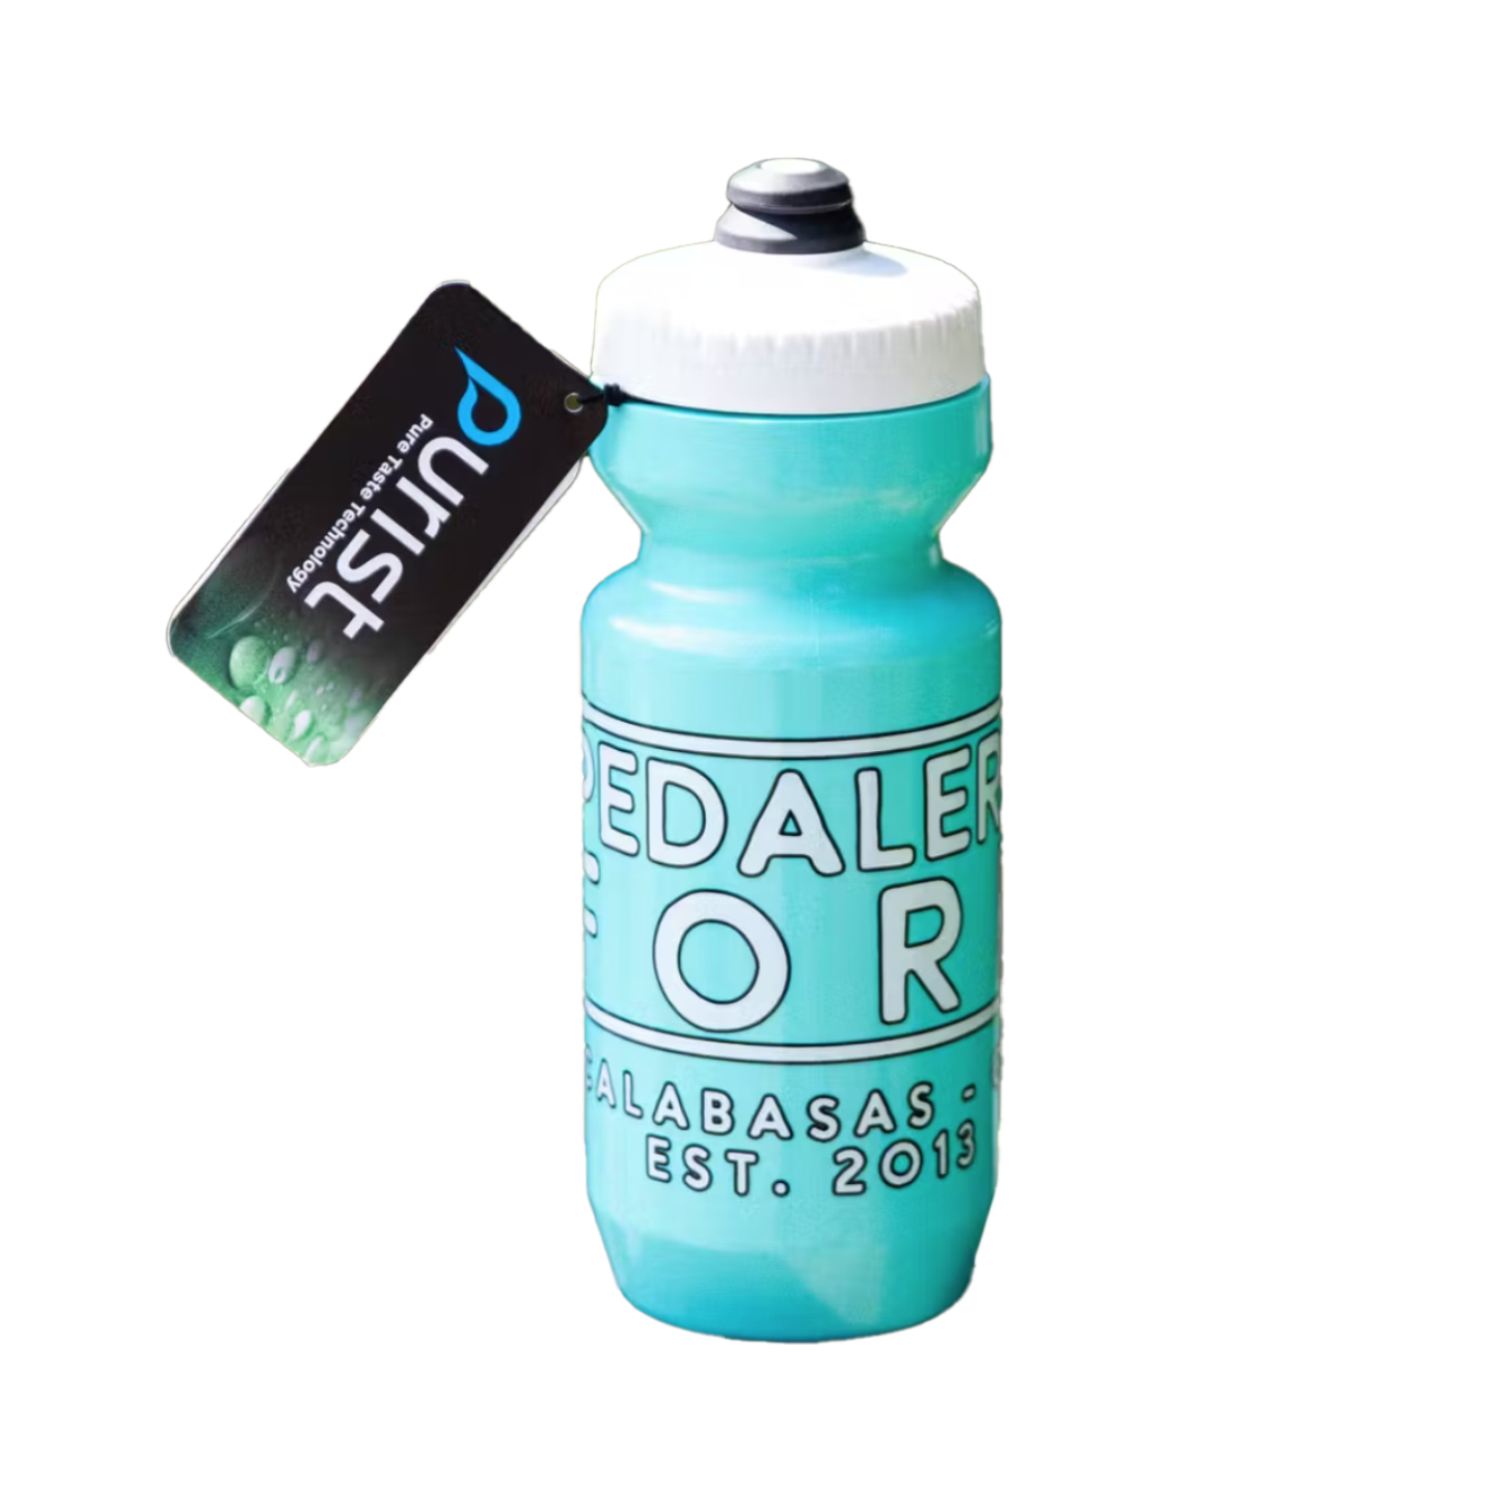 Teal colored water bottle with text "Pedalers Fork Calabasas Est. 2013"